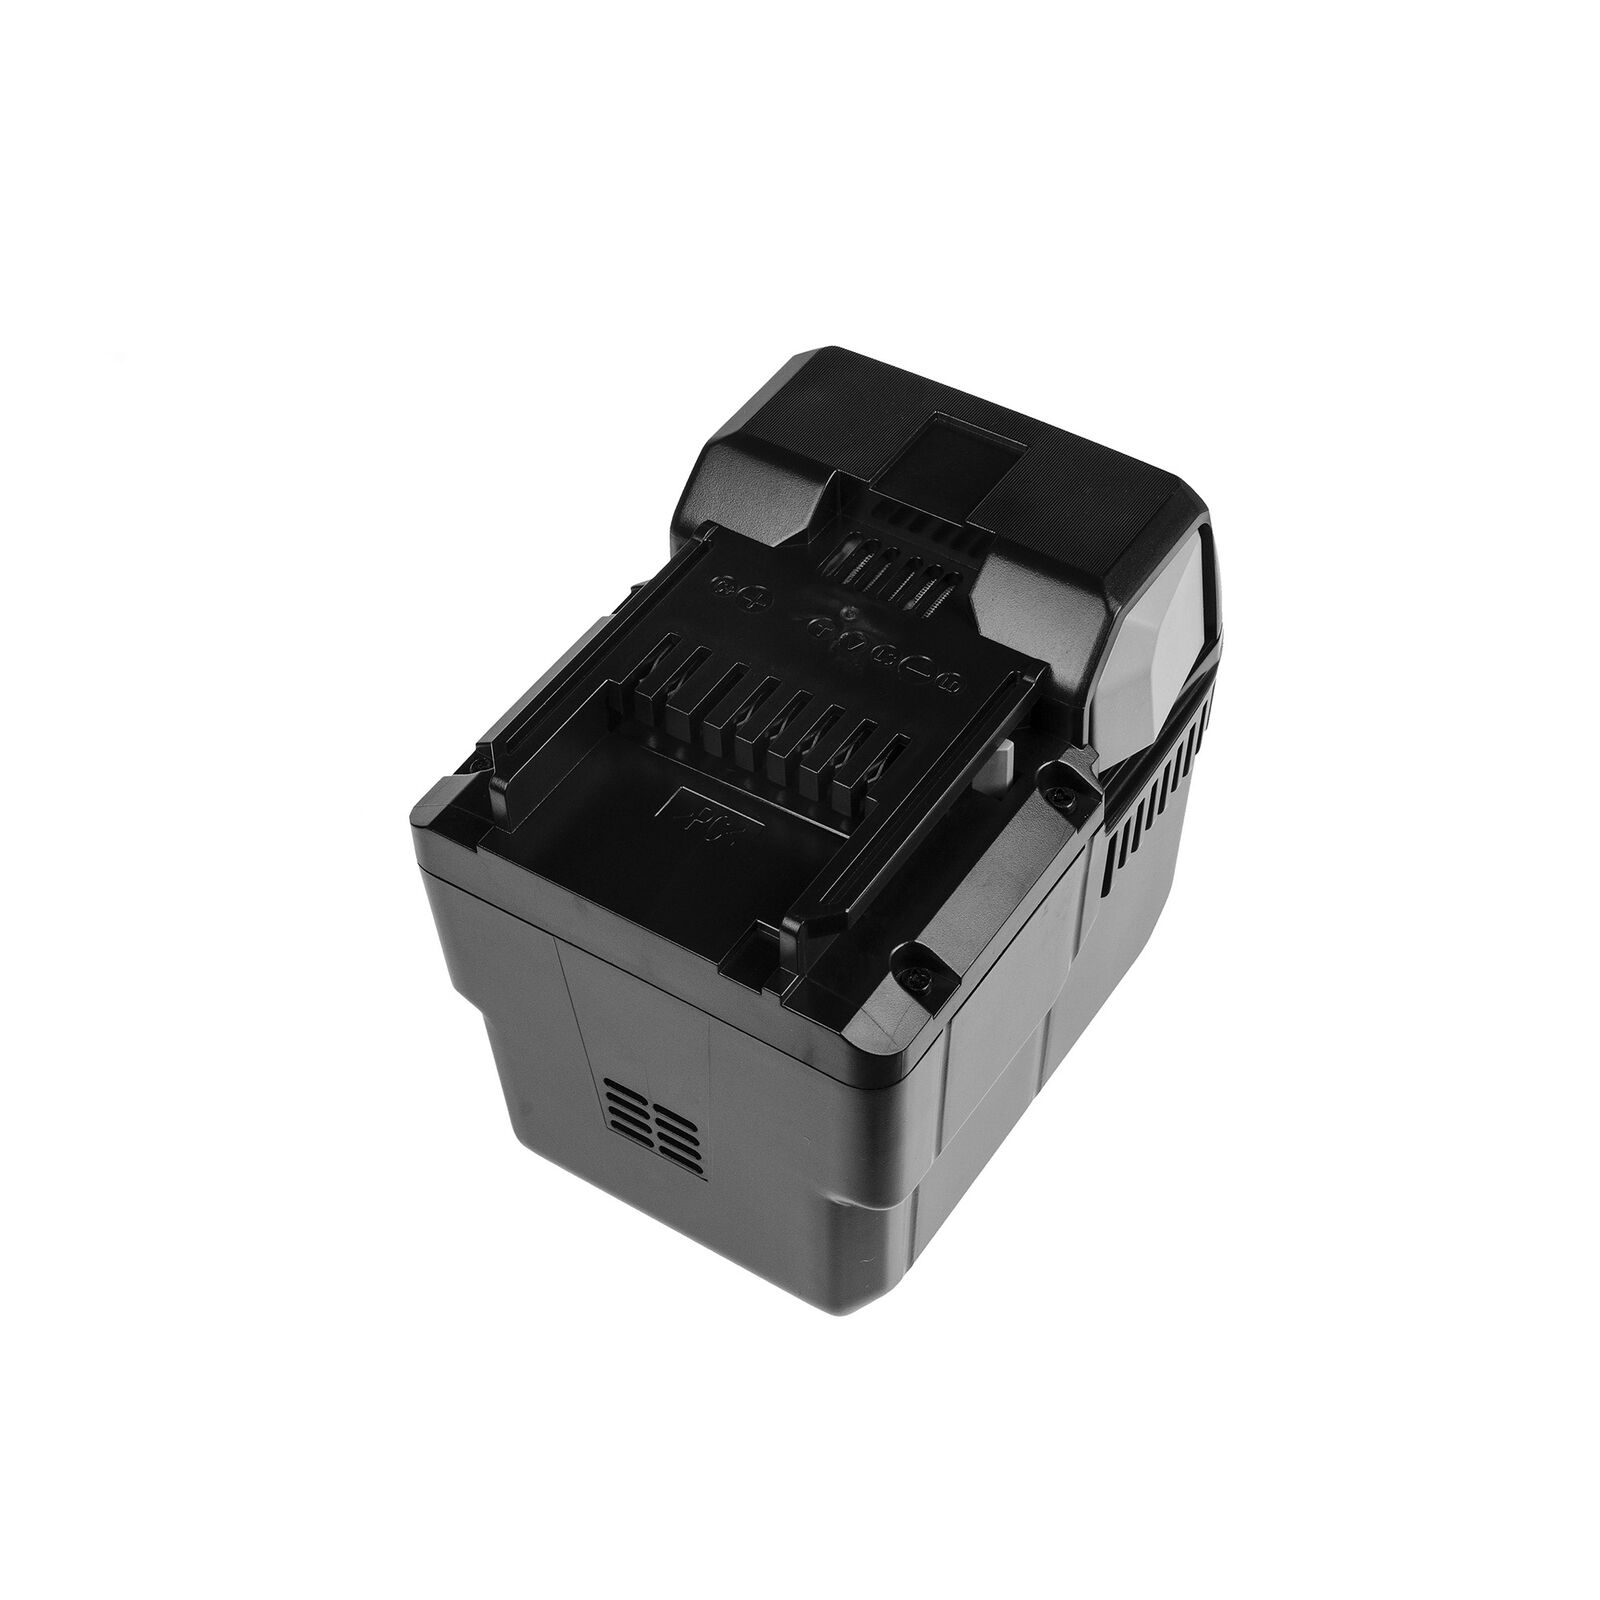 36V BSL3620 BSL3630 BSL3626 DH36DAL ML36DAL compatible Battery